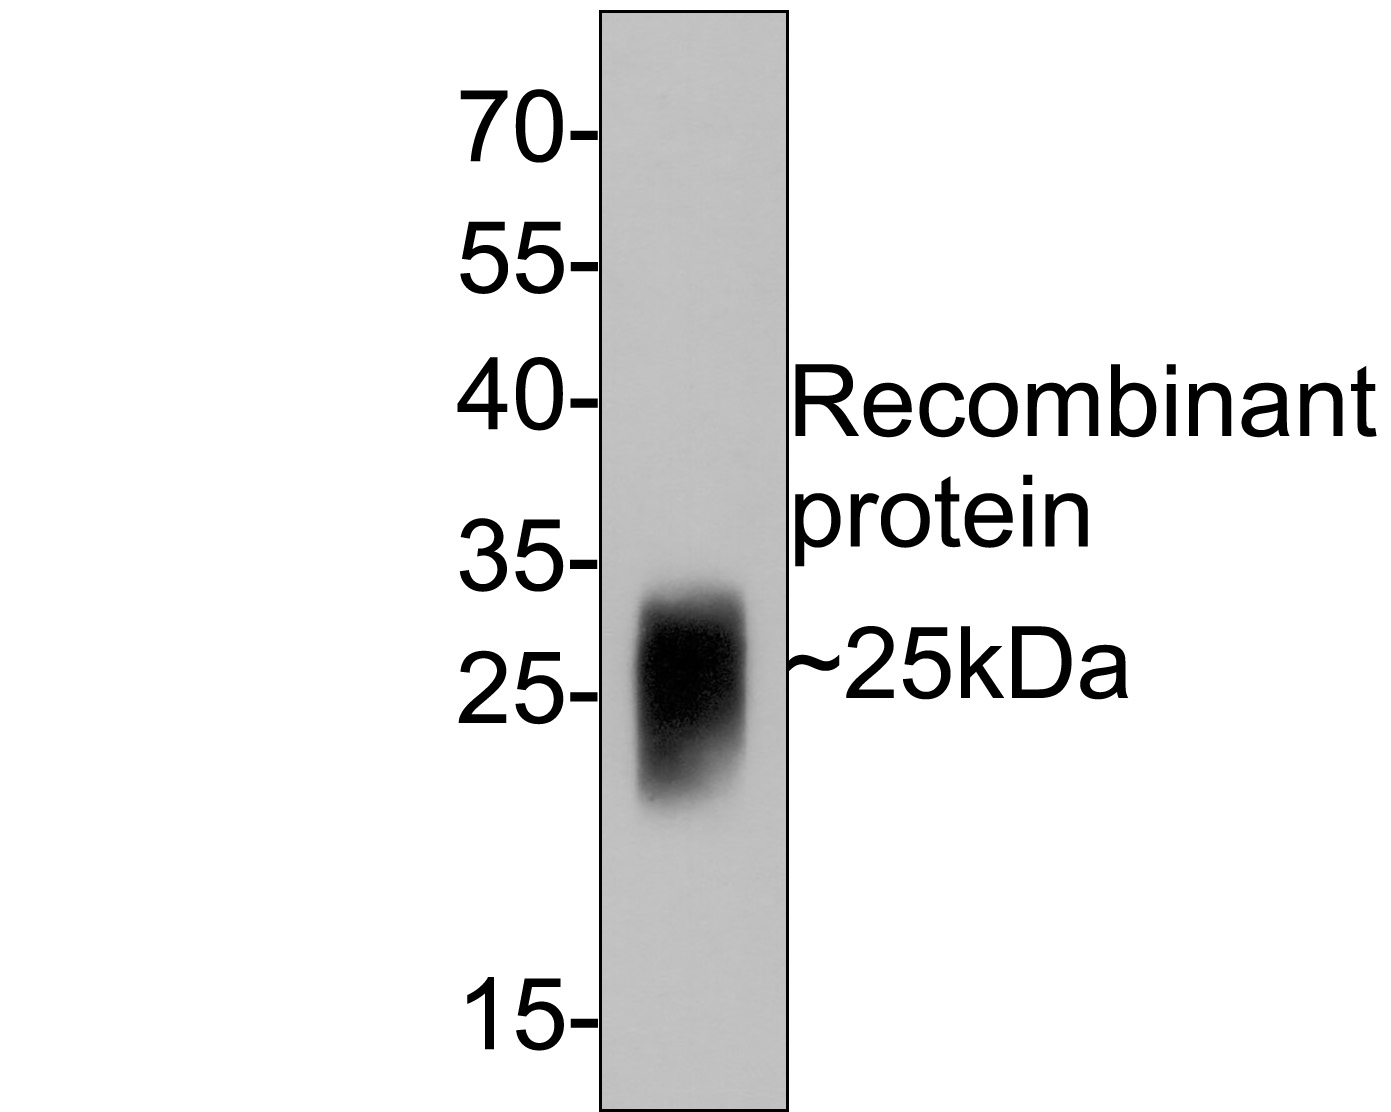 Western blot analysis of GM-CSF on recombinant protein with Mouse anti-GM-CSF antibody (HA601033) at 1/2,000 dilution.<br />
<br />
Lysates/proteins at 50 ng/Lane.<br />
<br />
Predicted band size: 25 kDa<br />
Observed band size: 25 kDa<br />
<br />
Exposure time: 2 minutes;<br />
<br />
12% SDS-PAGE gel.<br />
<br />
Proteins were transferred to a PVDF membrane and blocked with 5% NFDM/TBST for 1 hour at room temperature. The primary antibody (HA601033) at 1/2,000 dilution was used in 5% NFDM/TBST at room temperature for 2 hours. Goat Anti-Mouse IgG - HRP Secondary Antibody (HA1006) at 1:100,000 dilution was used for 1 hour at room temperature.